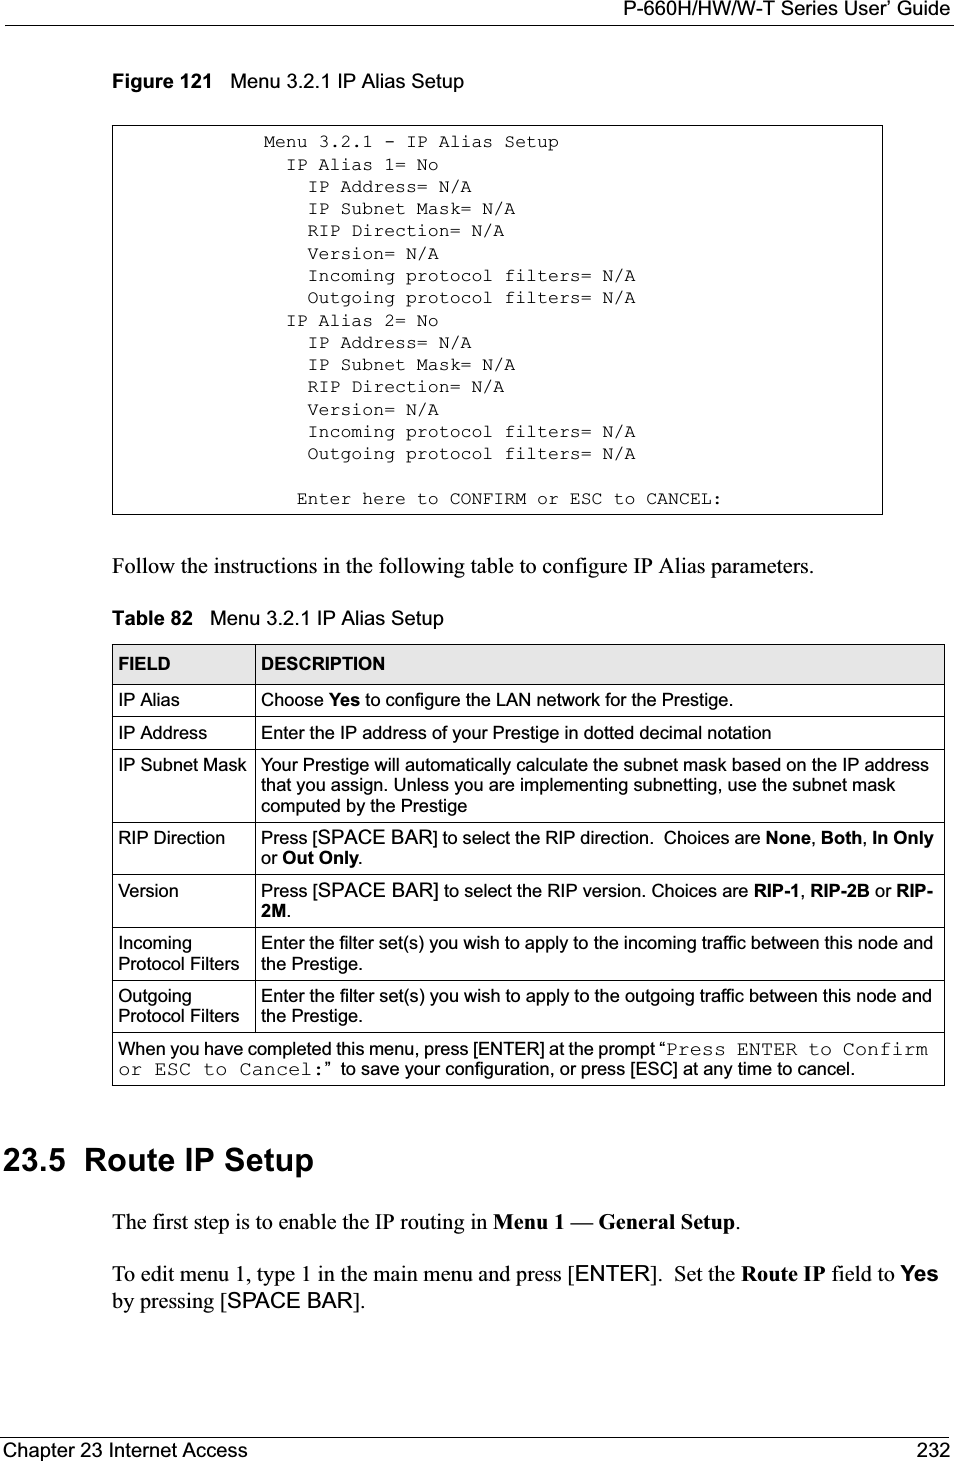 P-660H/HW/W-T Series User’ GuideChapter 23 Internet Access 232Figure 121   Menu 3.2.1 IP Alias SetupFollow the instructions in the following table to configure IP Alias parameters.23.5  Route IP SetupThe first step is to enable the IP routing in Menu 1 — General Setup.To edit menu 1, type 1 in the main menu and press [ENTER].  Set the Route IP field to Yesby pressing [SPACE BAR].Menu 3.2.1 - IP Alias Setup  IP Alias 1= No    IP Address= N/A    IP Subnet Mask= N/A    RIP Direction= N/A    Version= N/A    Incoming protocol filters= N/A    Outgoing protocol filters= N/A  IP Alias 2= No    IP Address= N/A    IP Subnet Mask= N/A    RIP Direction= N/A    Version= N/A    Incoming protocol filters= N/A    Outgoing protocol filters= N/A   Enter here to CONFIRM or ESC to CANCEL:Table 82   Menu 3.2.1 IP Alias SetupFIELD DESCRIPTIONIP Alias Choose Yes to configure the LAN network for the Prestige.IP Address Enter the IP address of your Prestige in dotted decimal notationIP Subnet Mask Your Prestige will automatically calculate the subnet mask based on the IP address that you assign. Unless you are implementing subnetting, use the subnet mask computed by the PrestigeRIP Direction Press [SPACE BAR] to select the RIP direction.  Choices are None,Both,In Onlyor Out Only.Version Press [SPACE BAR] to select the RIP version. Choices are RIP-1,RIP-2B or RIP-2M.IncomingProtocol FiltersEnter the filter set(s) you wish to apply to the incoming traffic between this node and the Prestige.Outgoing Protocol FiltersEnter the filter set(s) you wish to apply to the outgoing traffic between this node and the Prestige.When you have completed this menu, press [ENTER] at the prompt “Press ENTER to Confirm or ESC to Cancel:”  to save your configuration, or press [ESC] at any time to cancel.